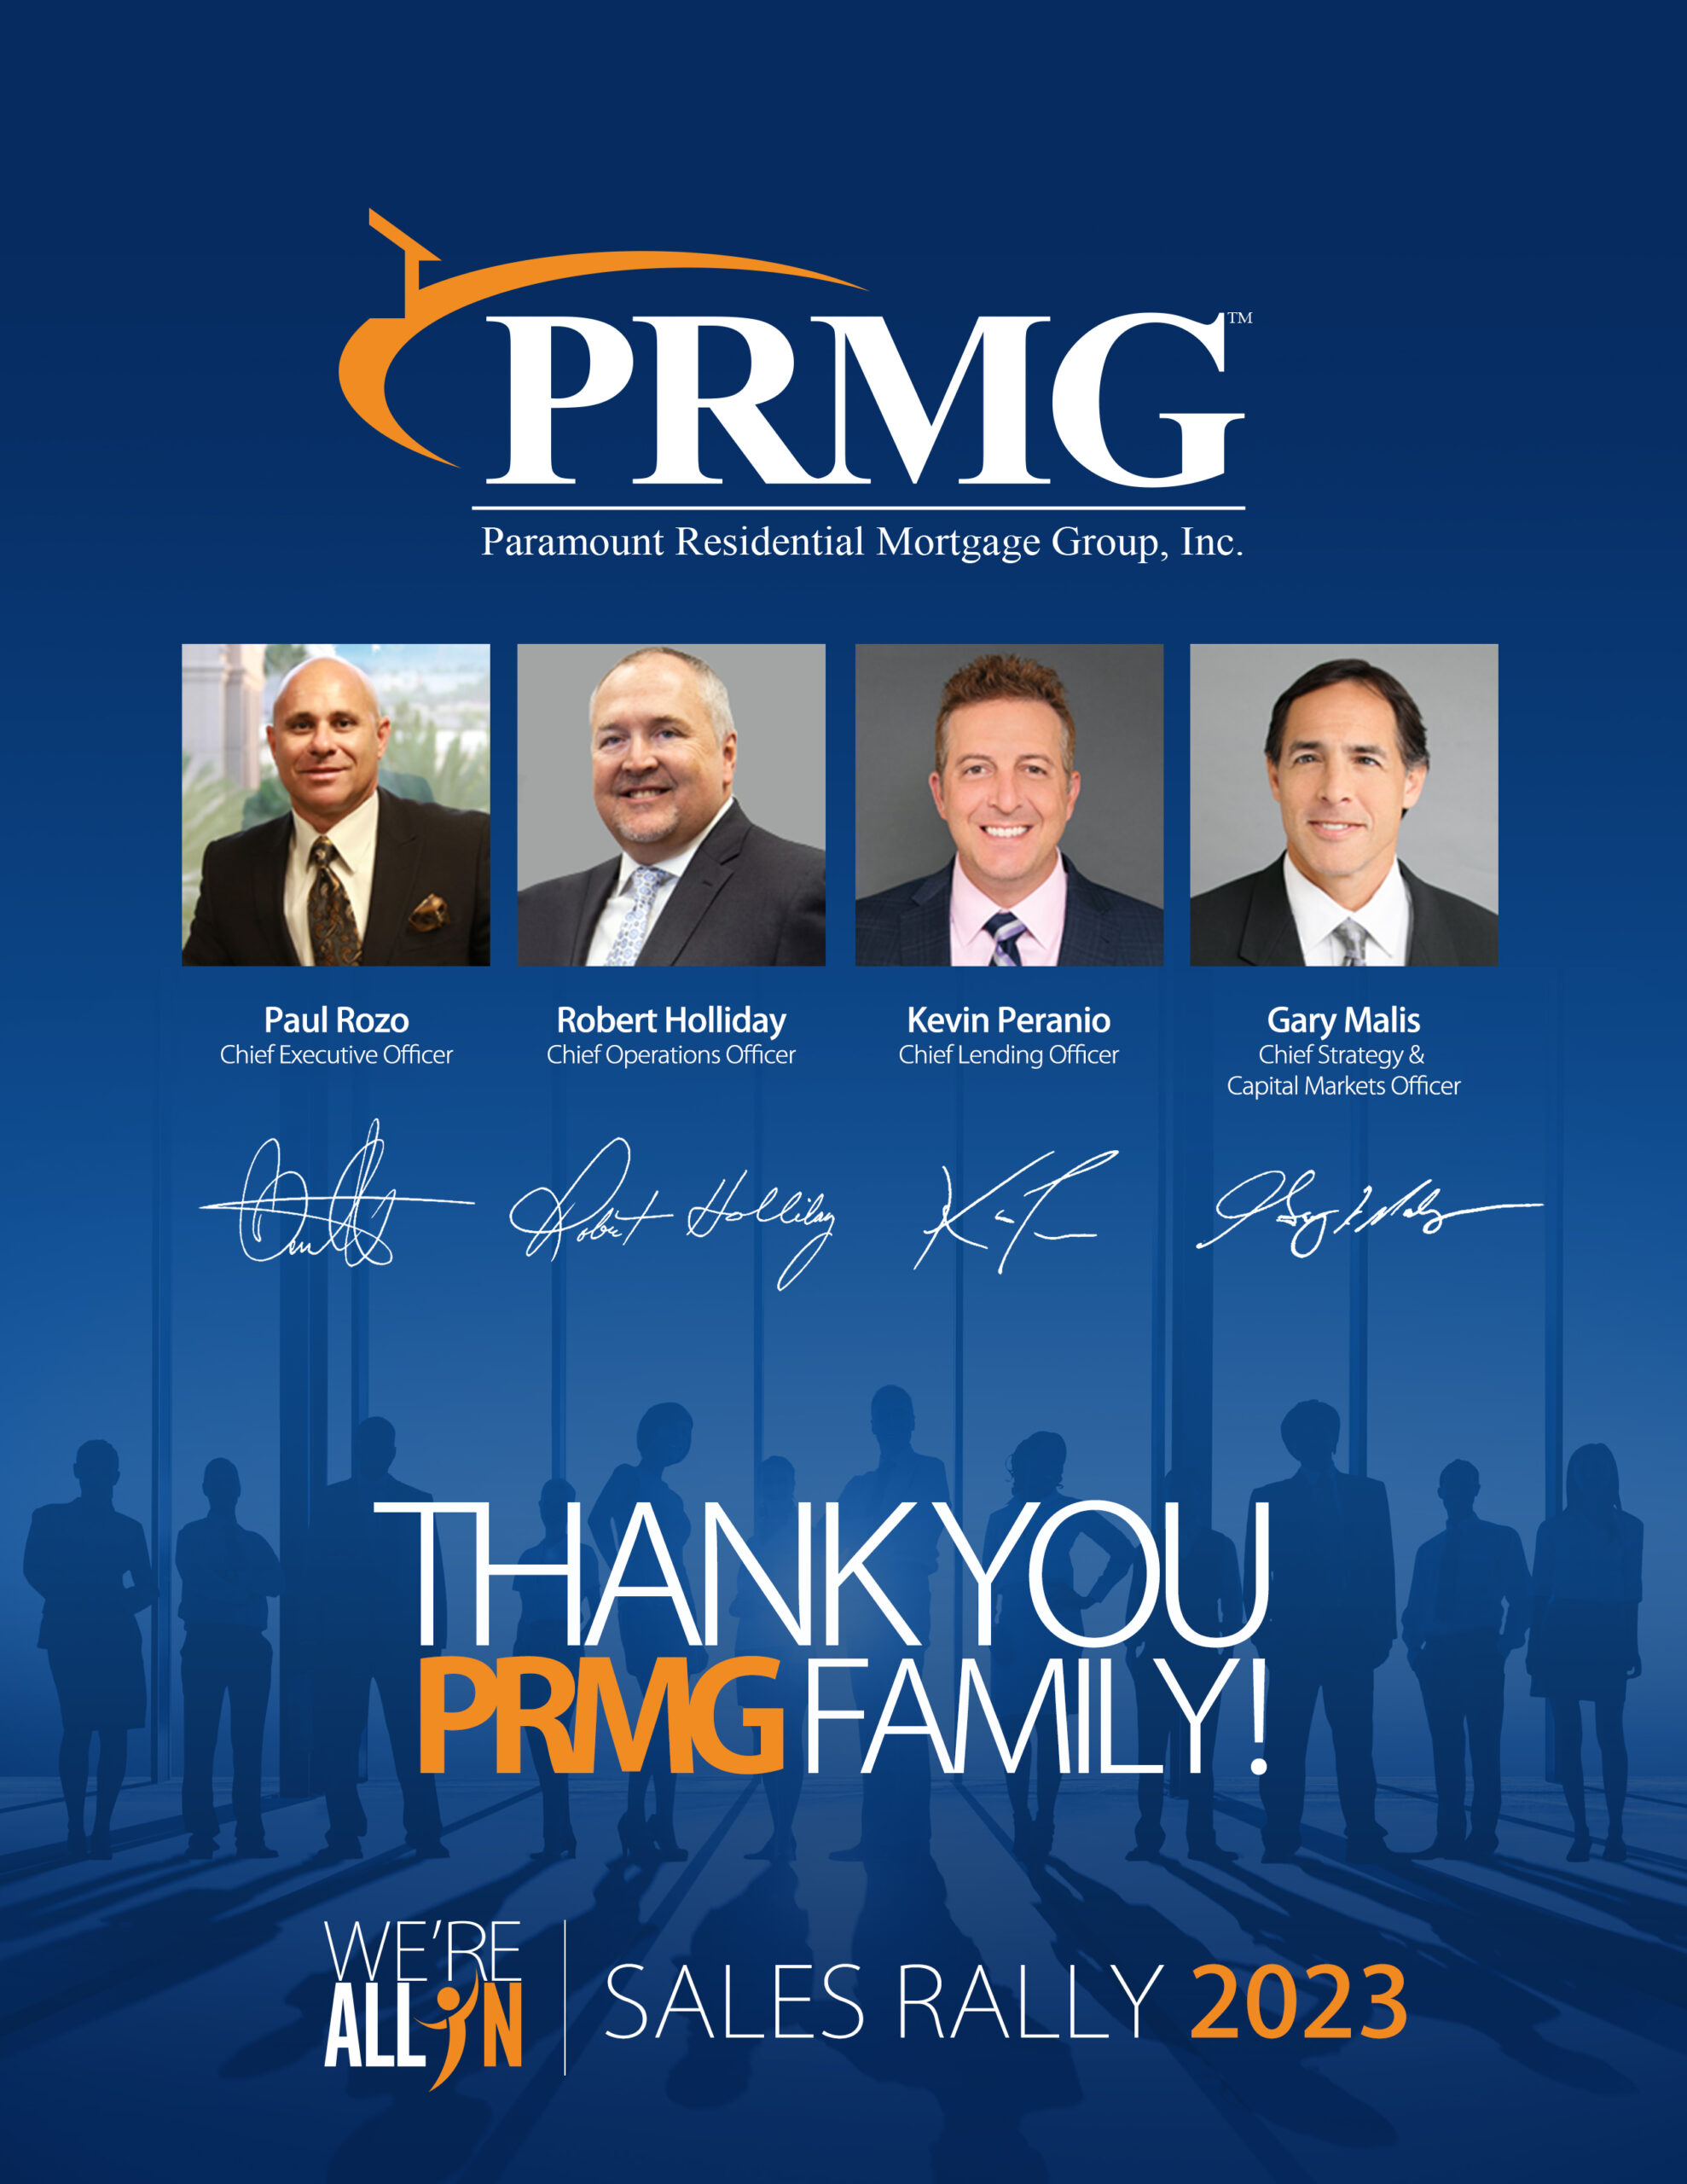 PRMG Sales Rally 2023 Agenda Page 4 - Thank You